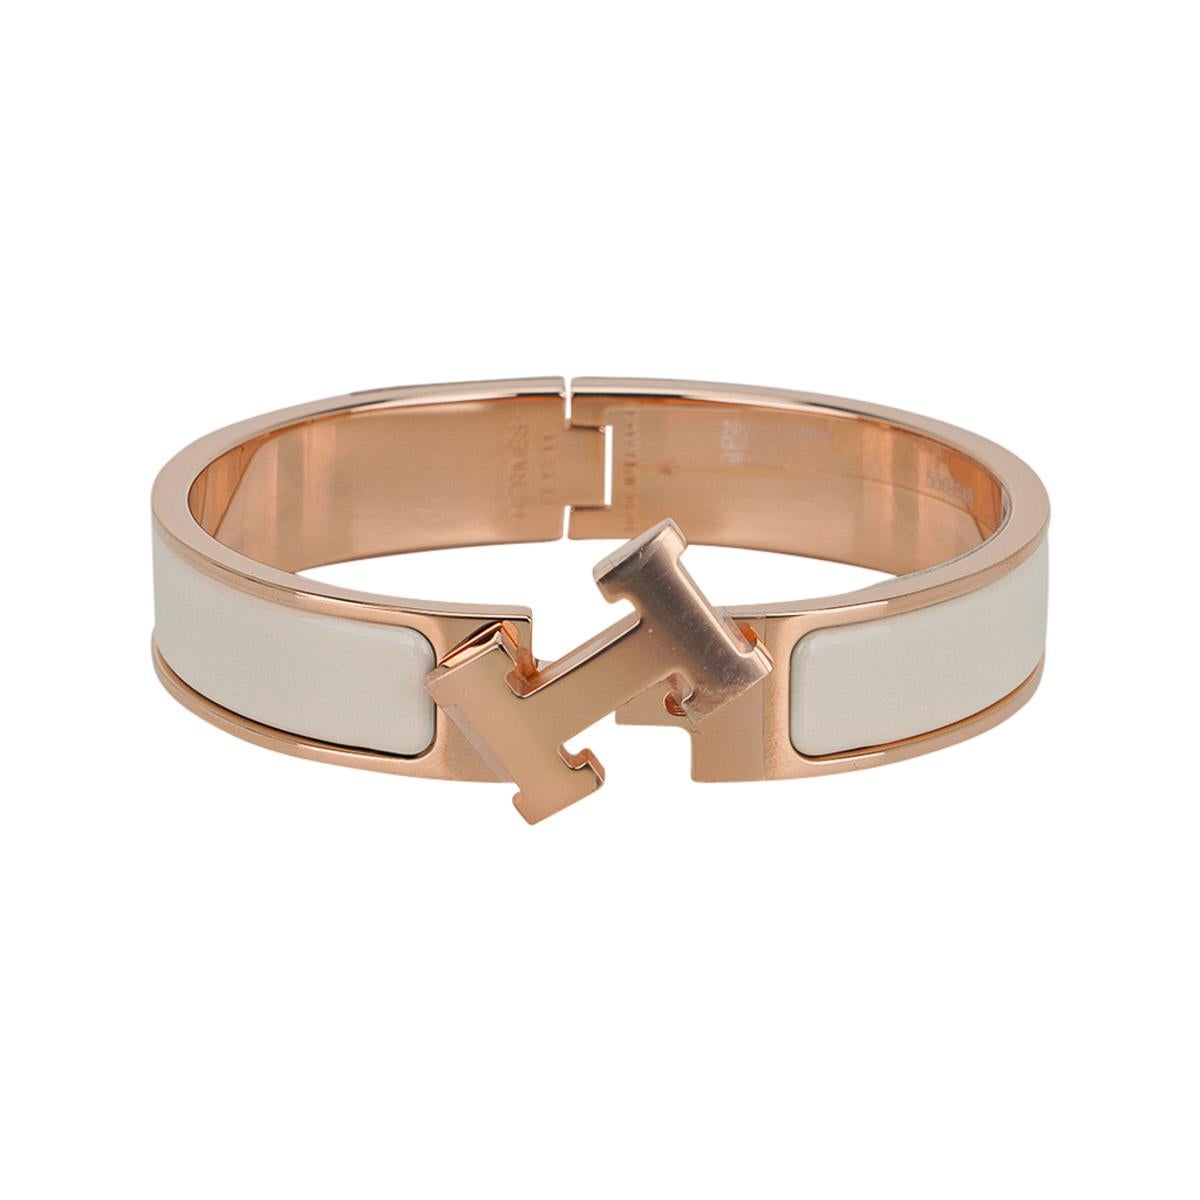 Mightychic offers an Hermes Clic H Bracelet featured in Creme Enamel.
Set in Rose Gold plated hardware.
Chic, modern and unmistakably Hermes!
A hinged band allows the H to swivel and open the bracelet.
Comes with pouch and signature Hermes box.
NEW